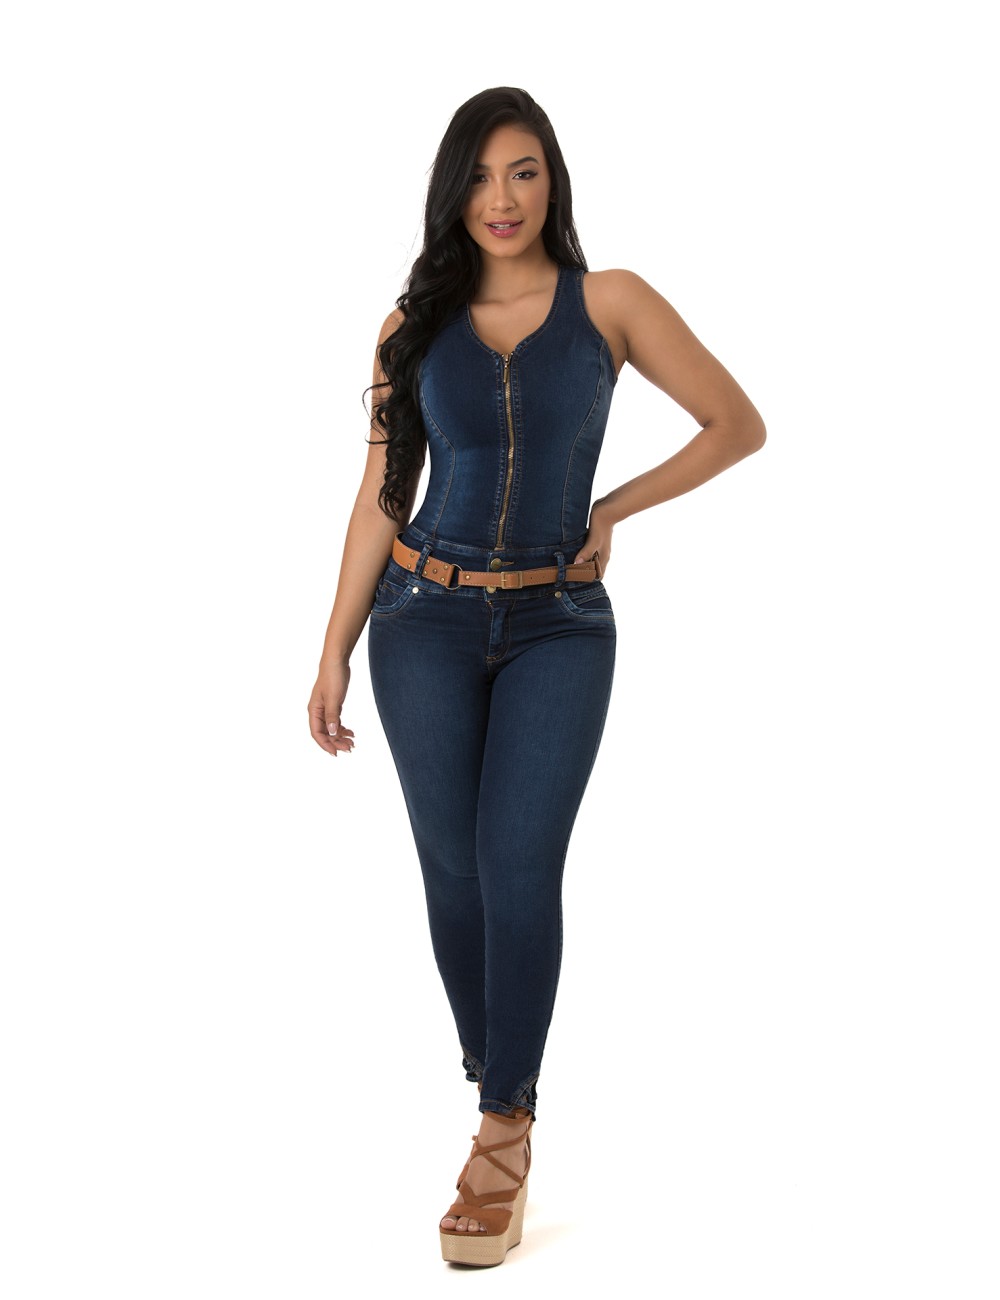 Butt lifting jeans, push up brazilian style jeans, bump up jeans